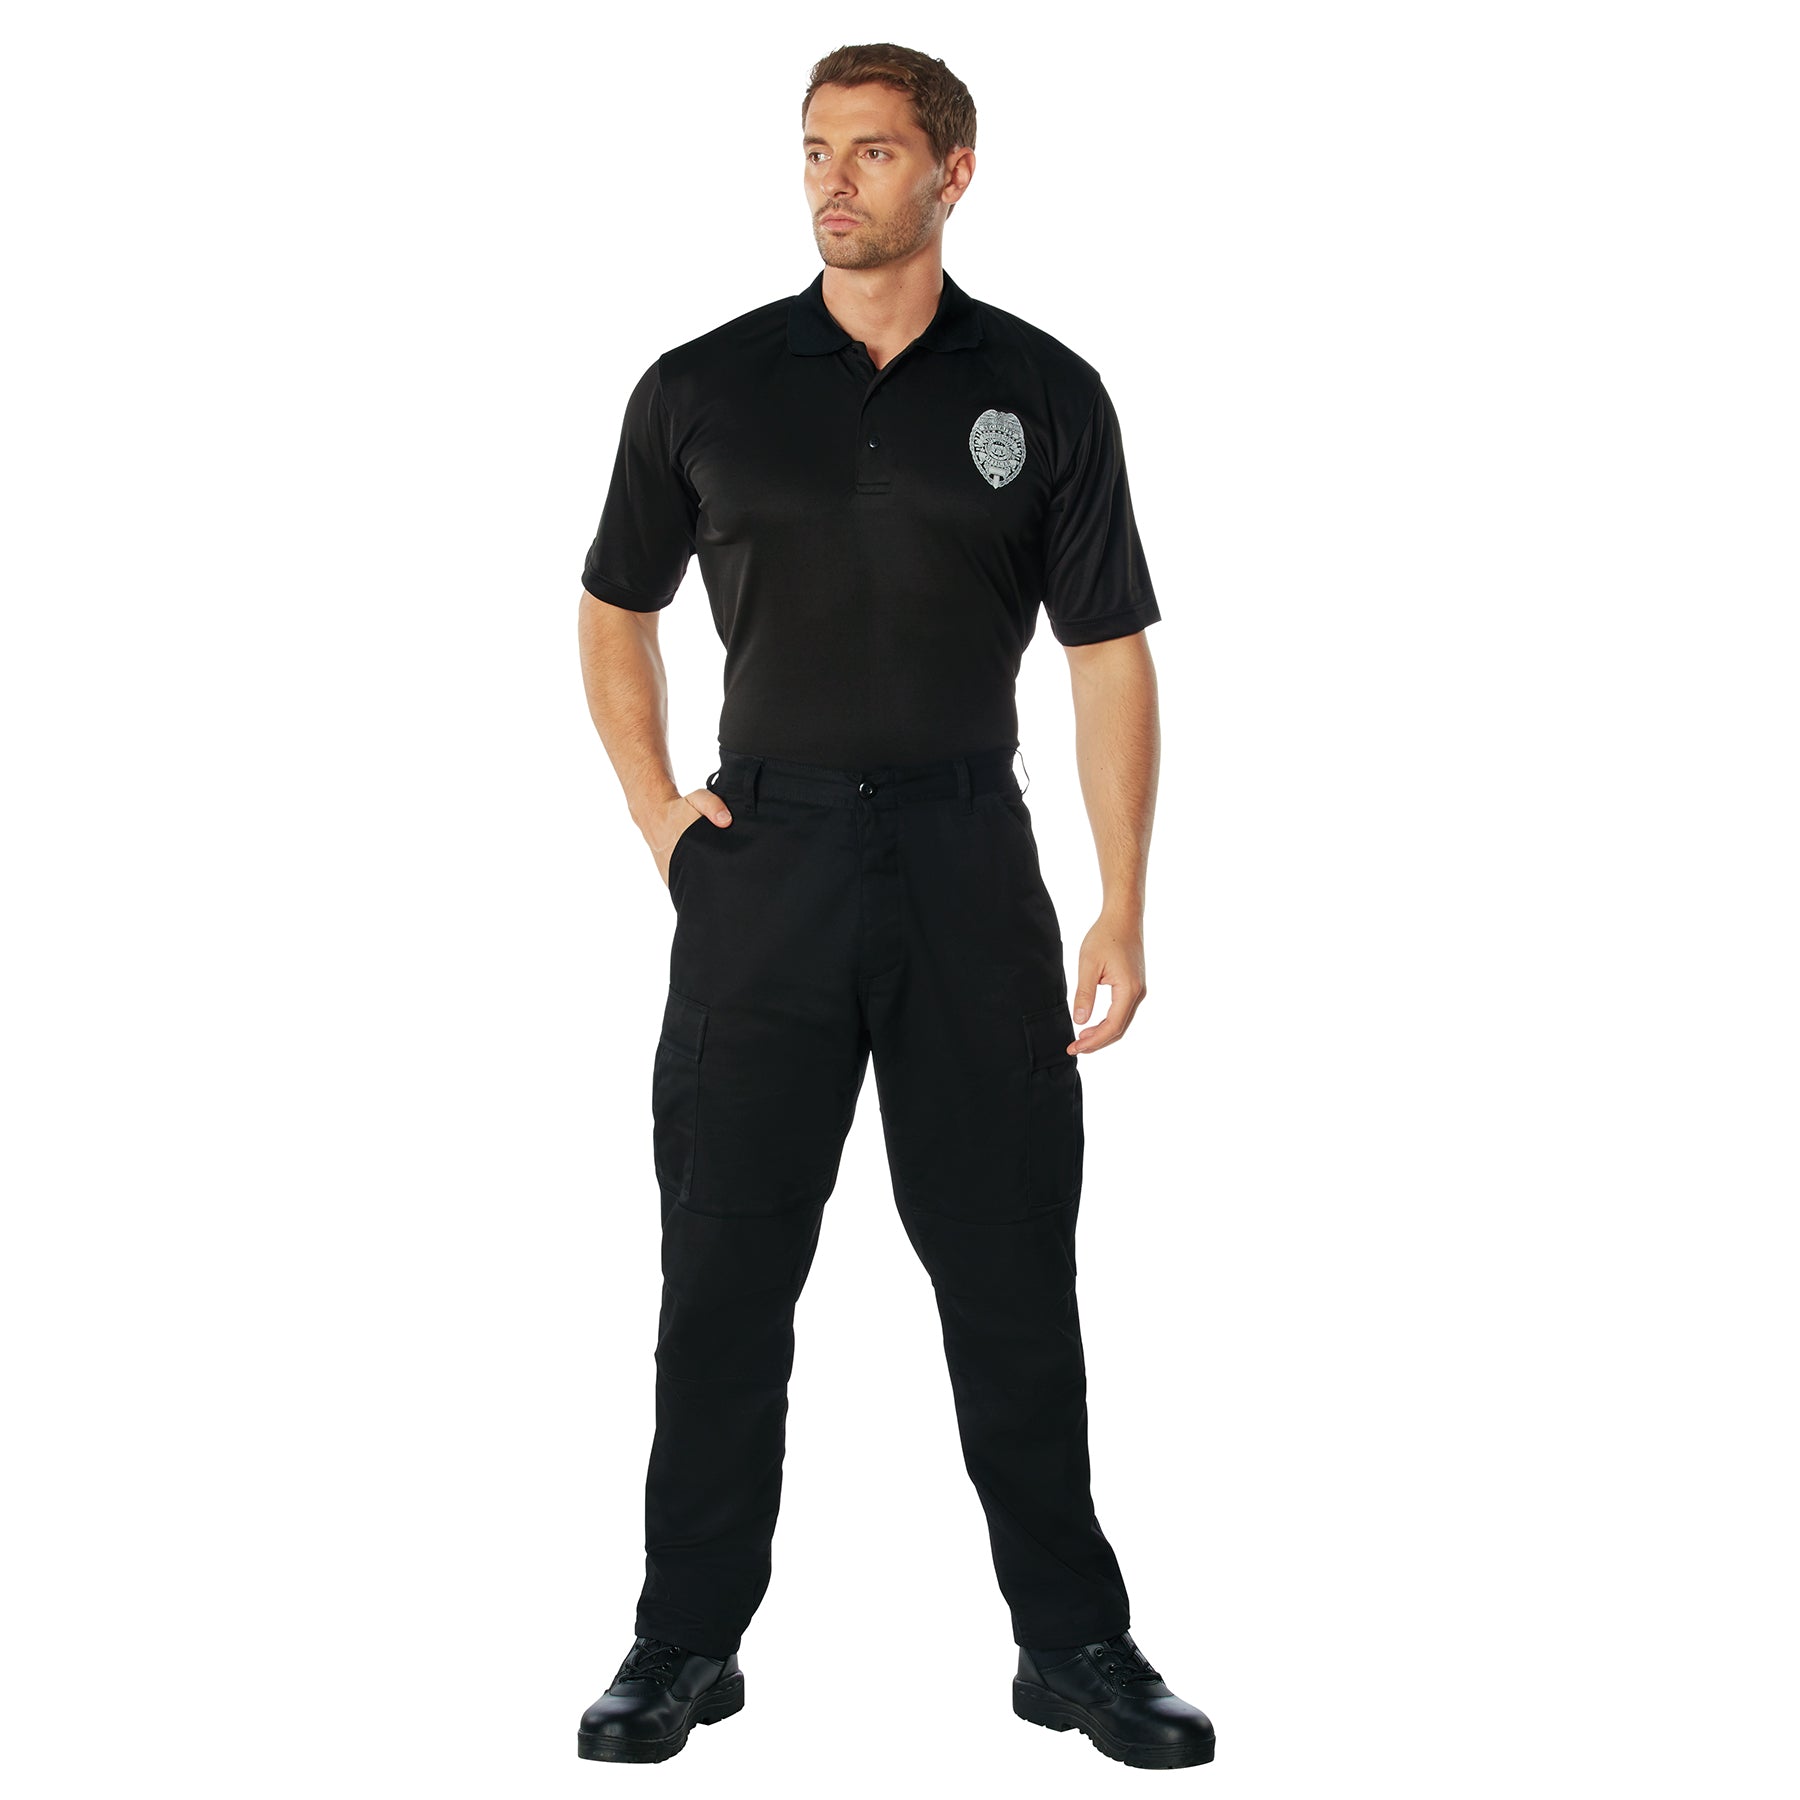 [Public Safety] Poly Moisture Wicking Security Badge Polo T-Shirts